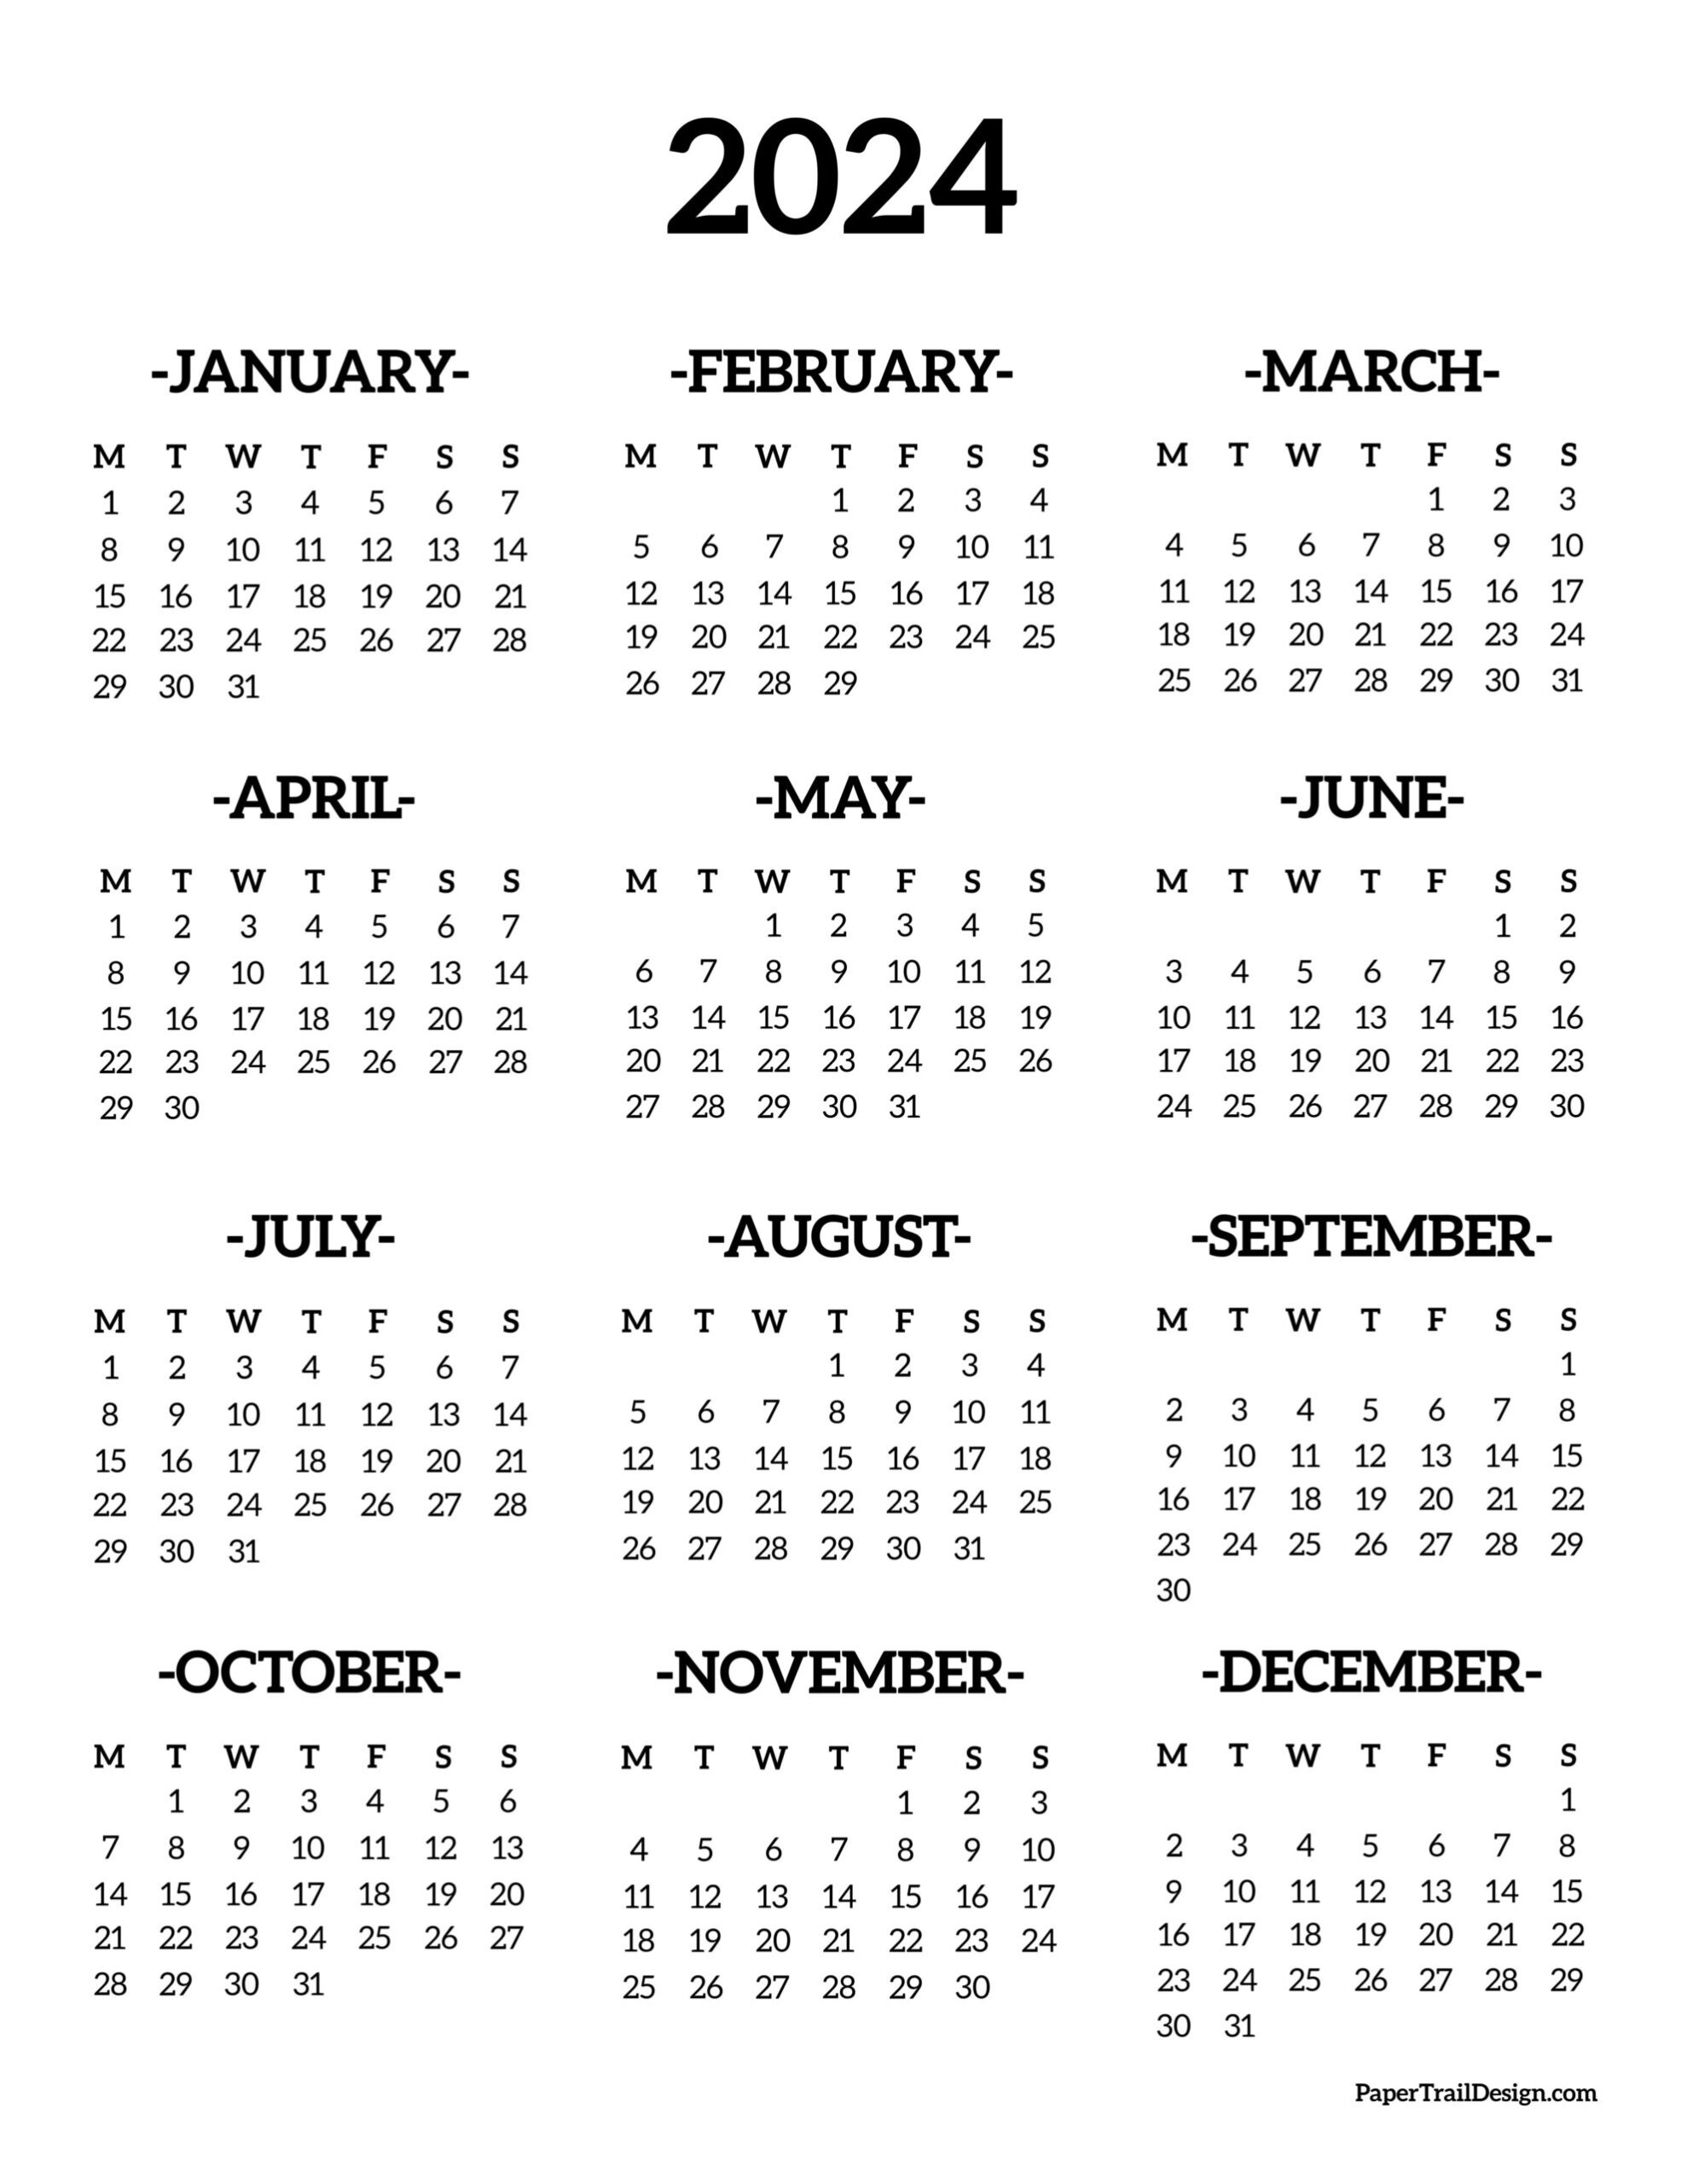 2024 Monday Start Calendar - One Page - Paper Trail Design with Free Printable Calendar 2024 Monday Start